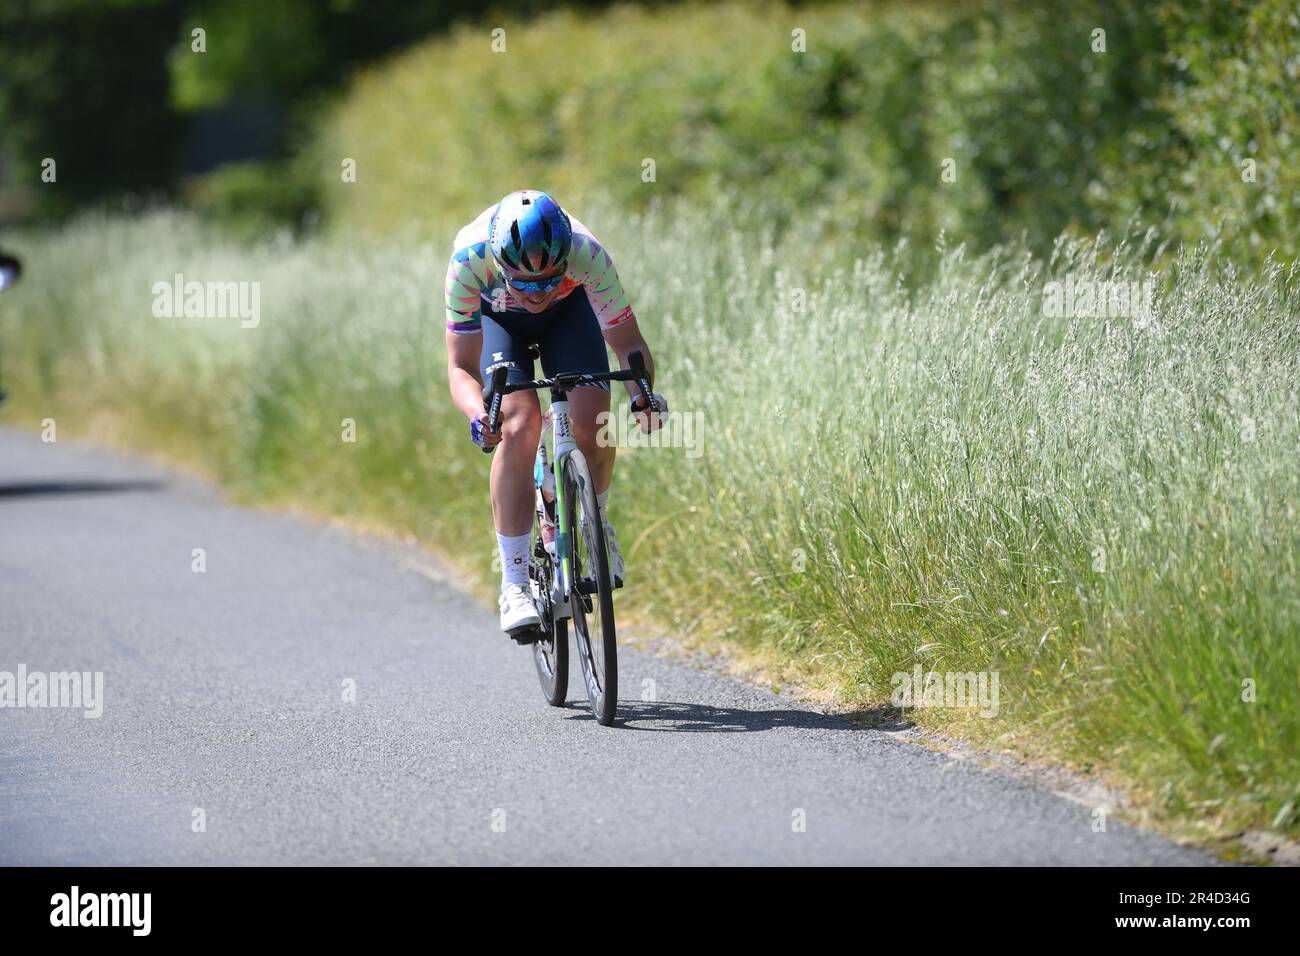 UCI Women's World Tour, Ford Ford RideLondon Classique Saturday 27 May: Stage Two: Maldon. Chloe Dygert (Canyon/SRAM Racing) making a break before her Stage Two victory in Maldon. Credit: Peter Goding/Alamy Live News Stock Photo